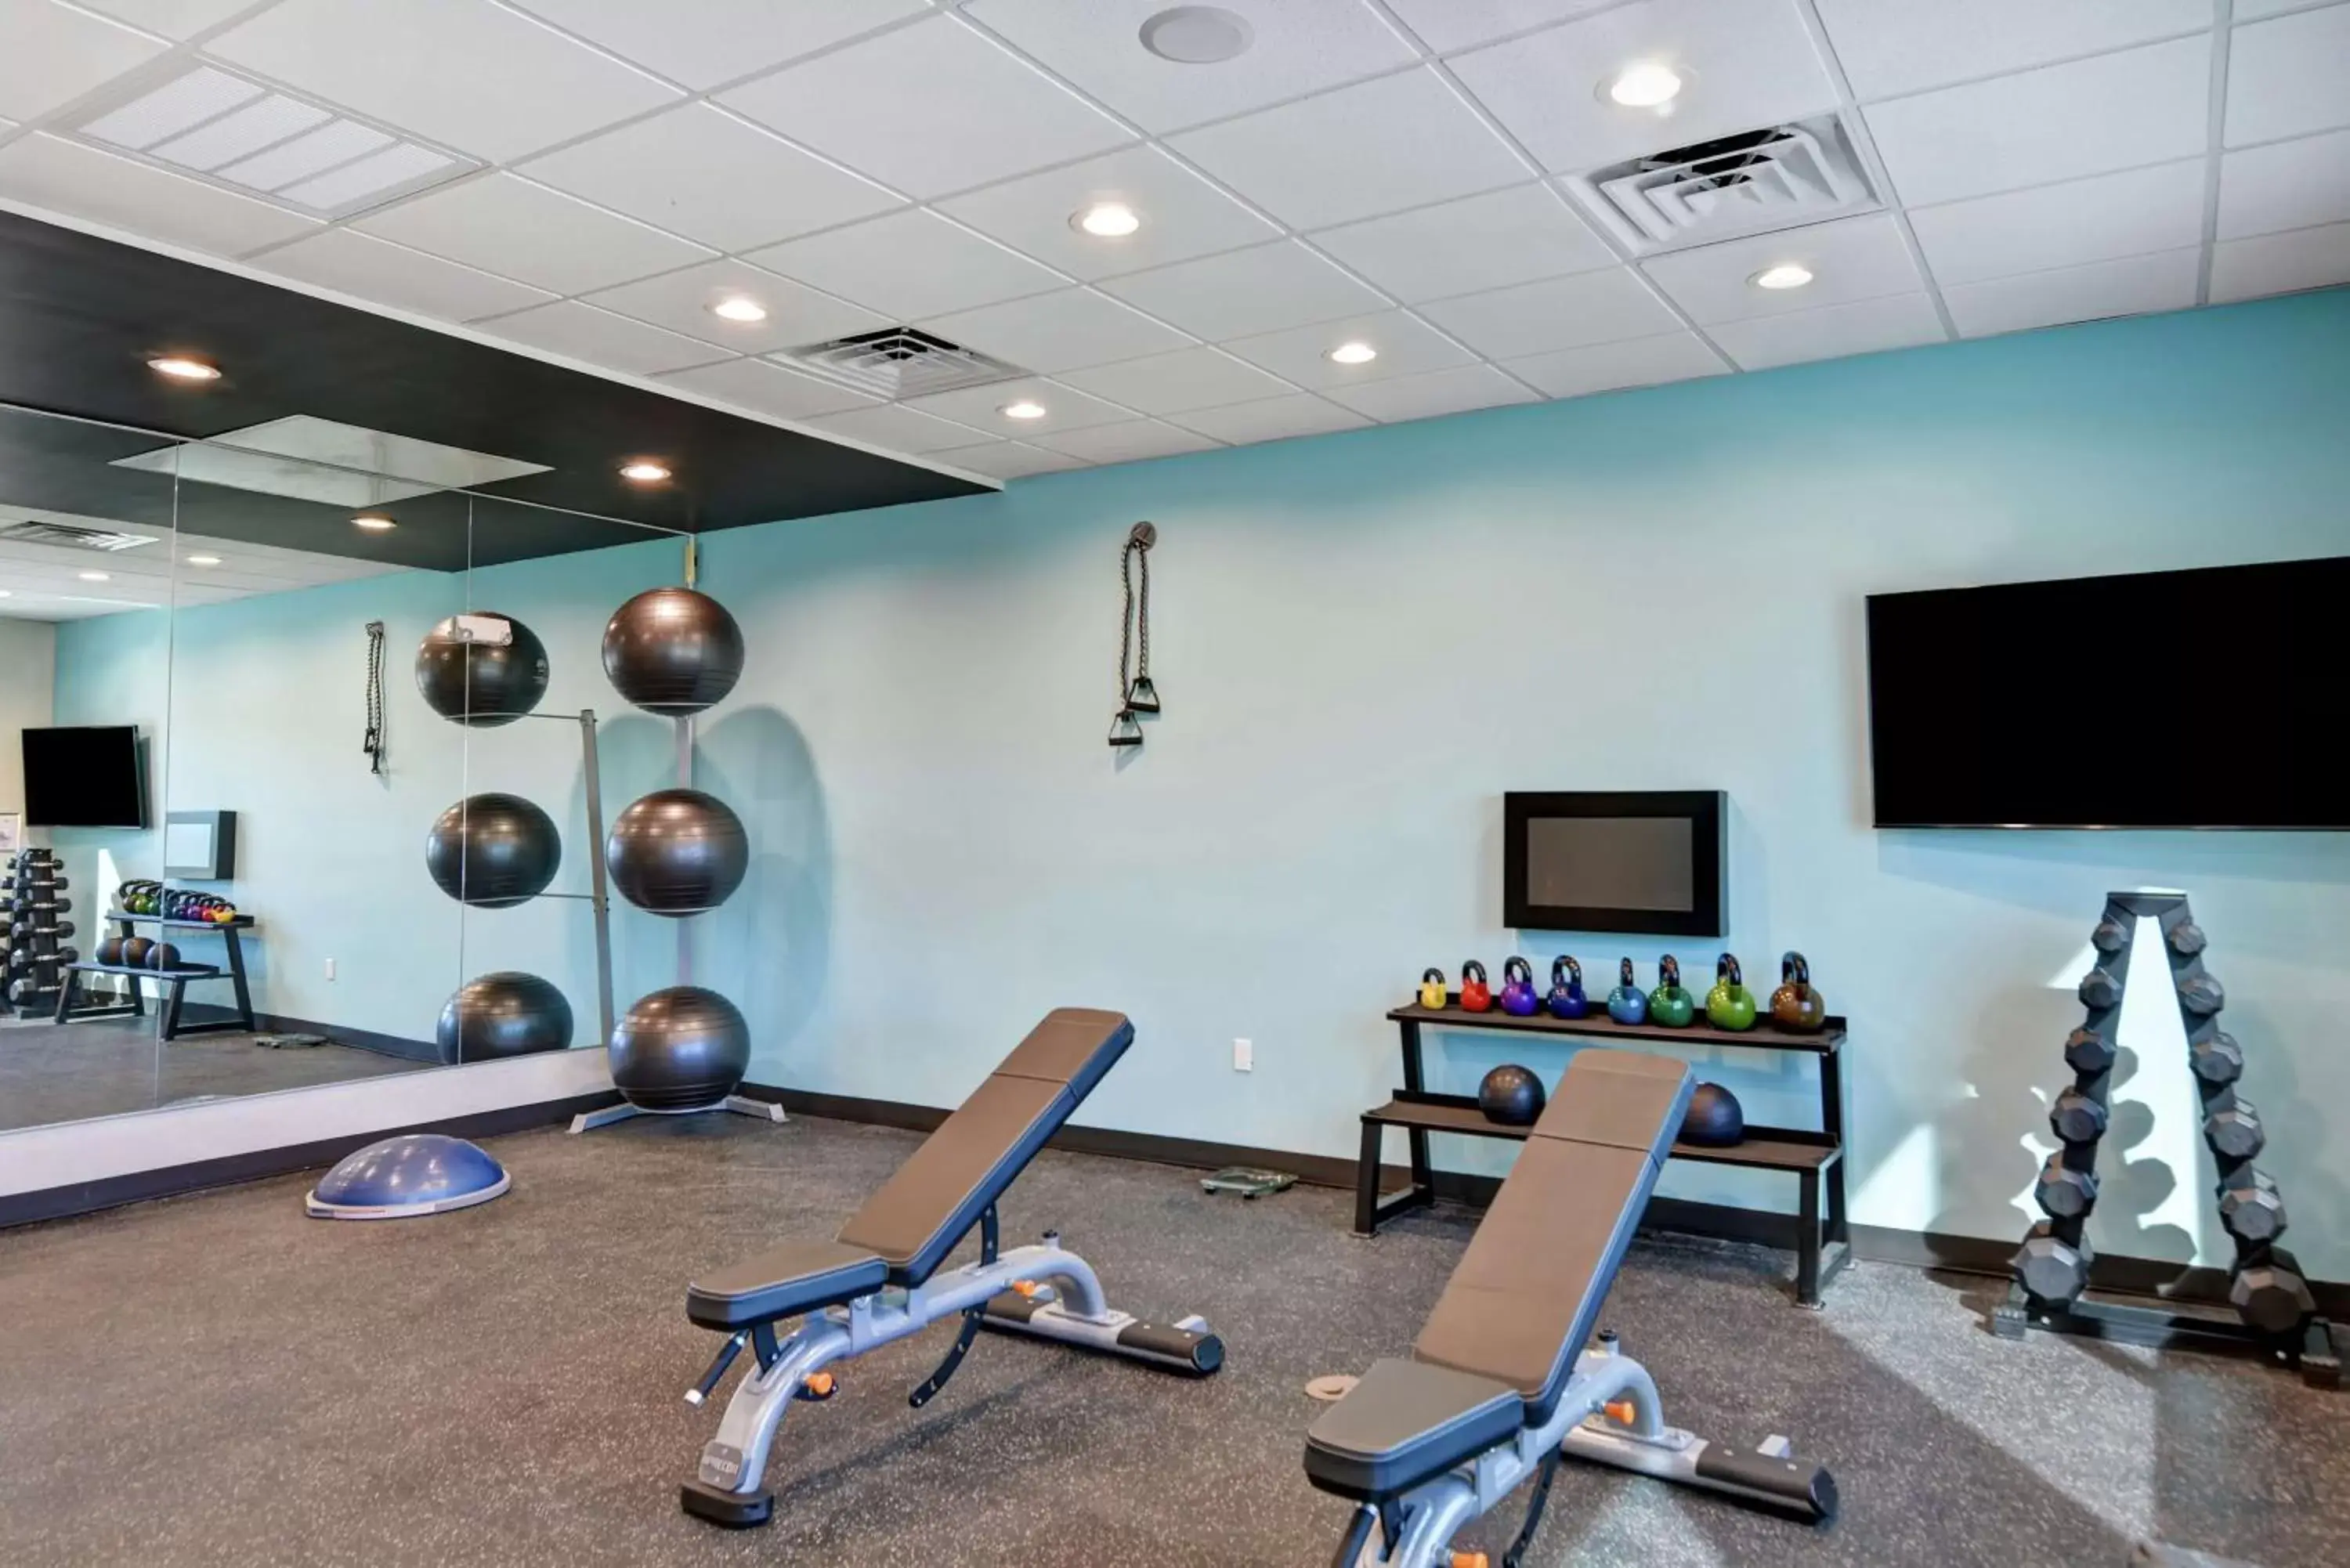 Fitness centre/facilities, Fitness Center/Facilities in Tru By Hilton Baton Rouge Citiplace